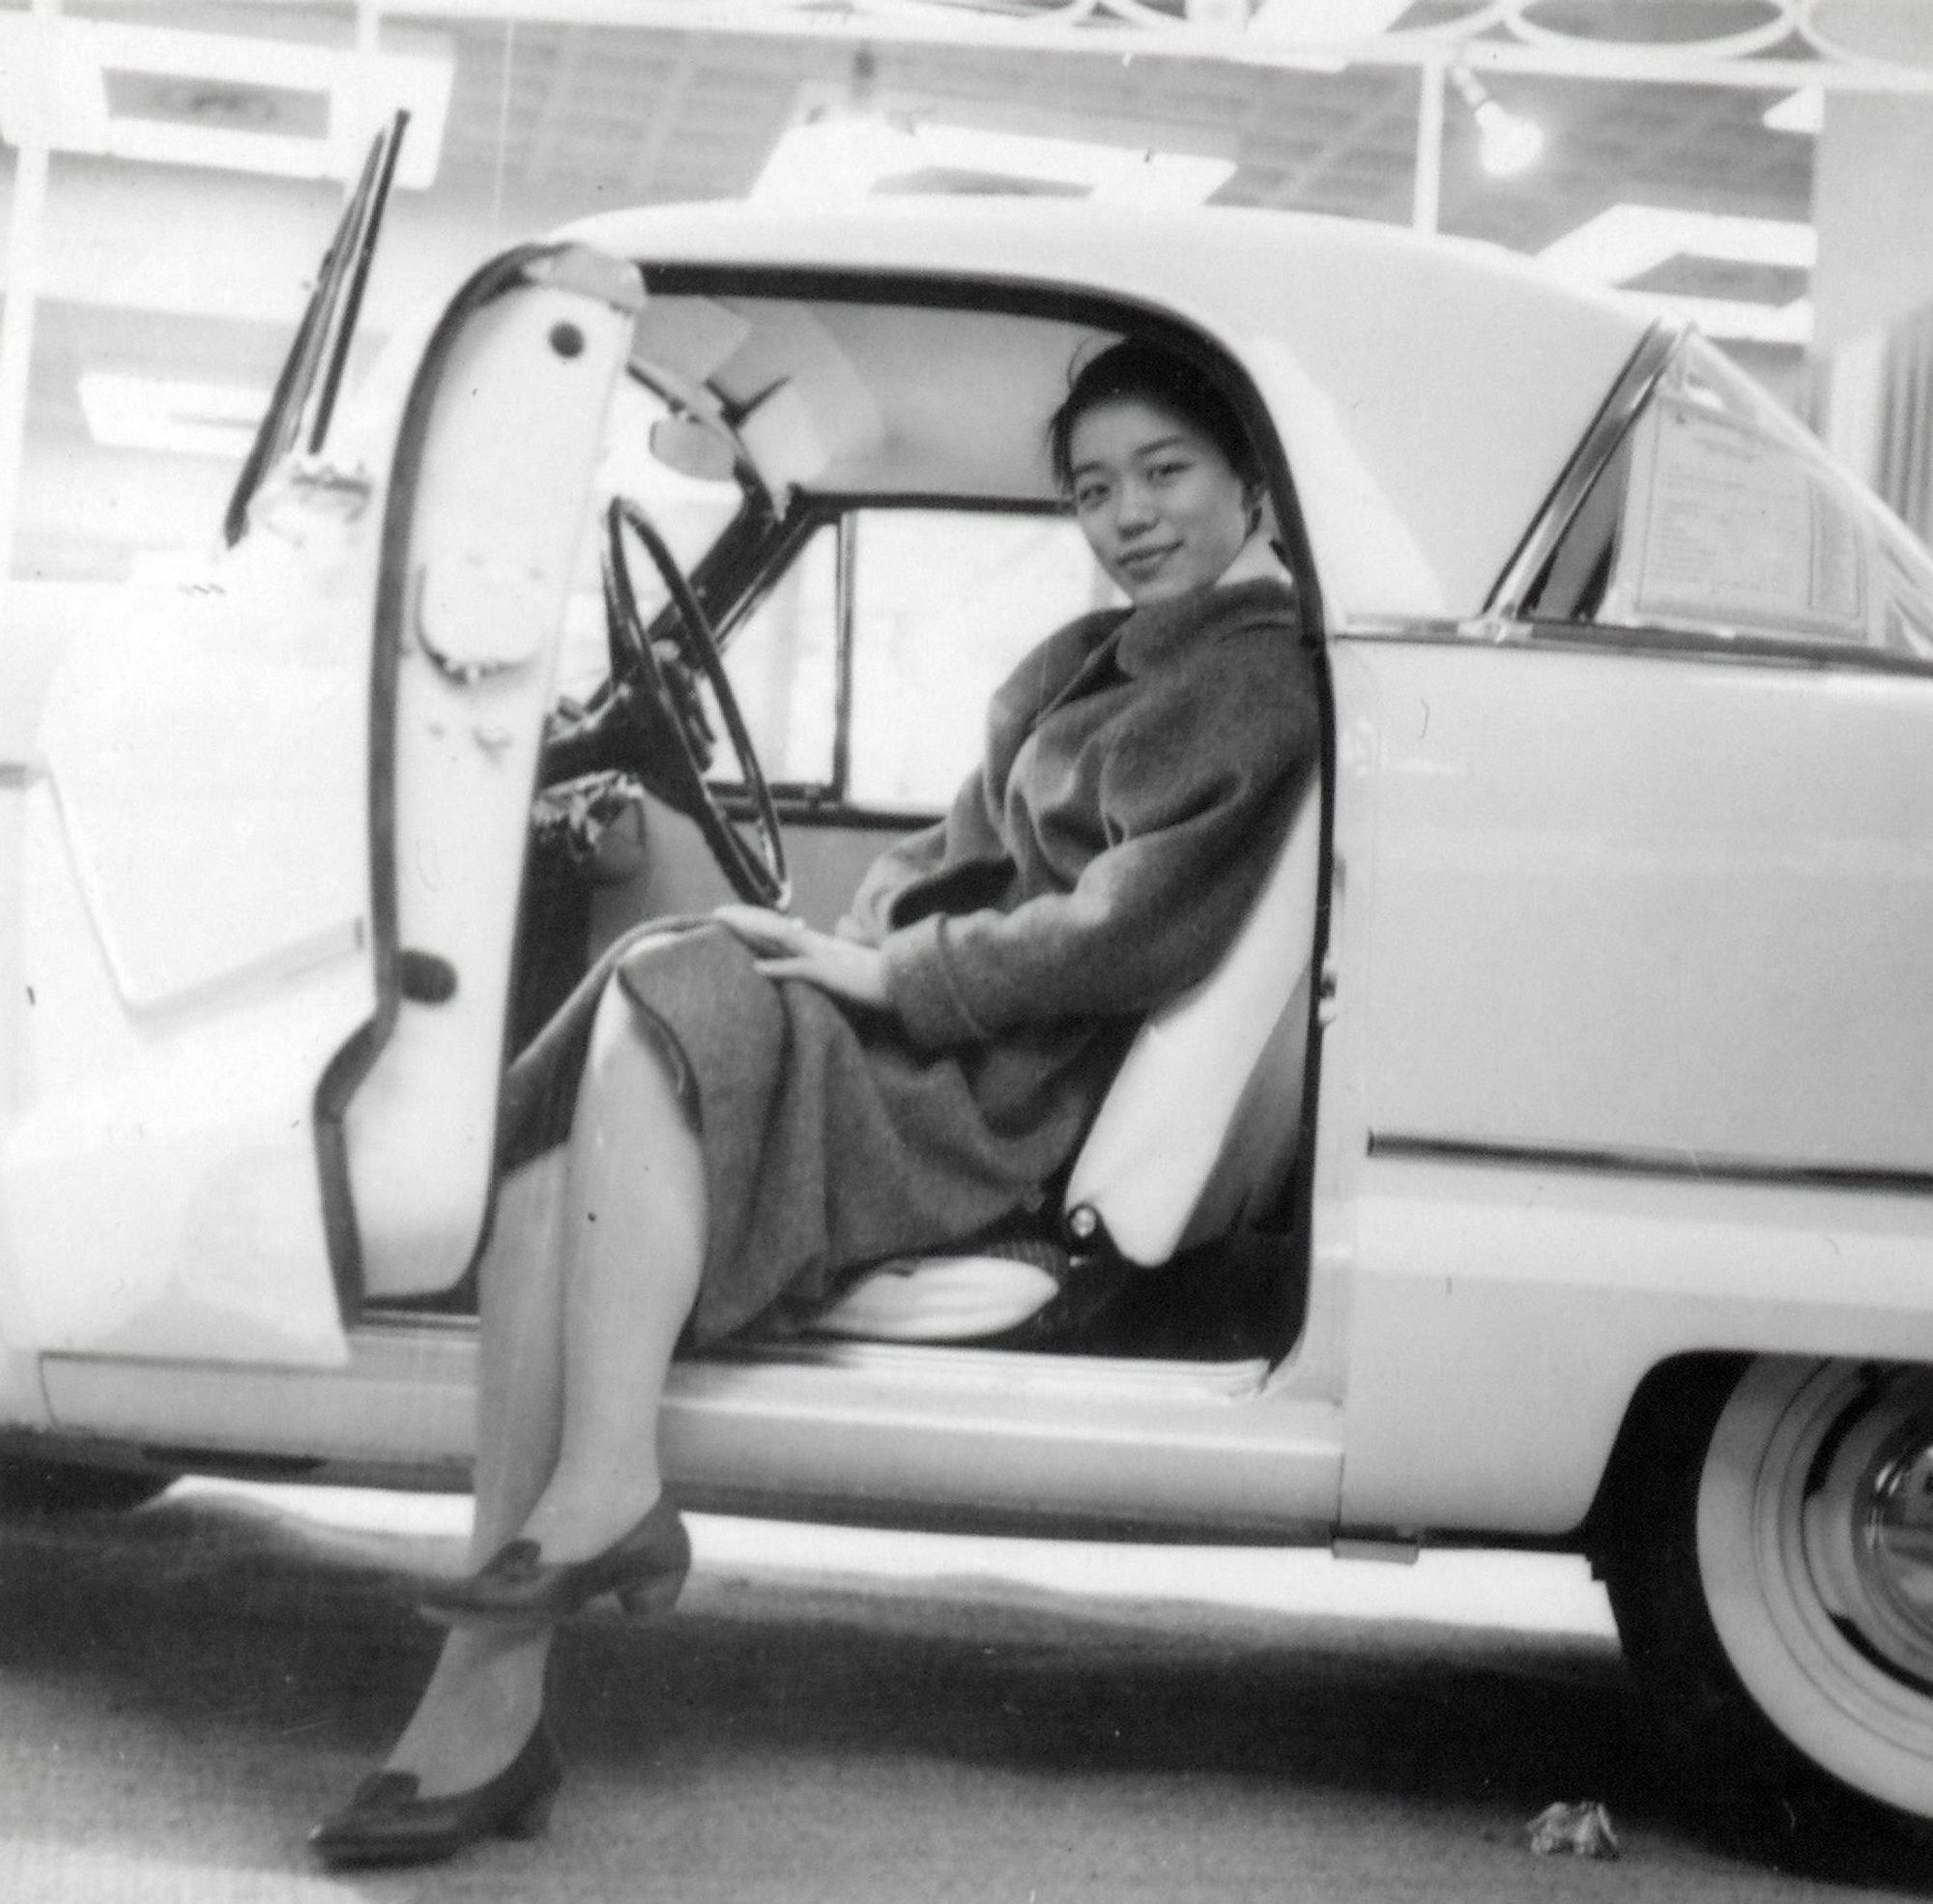 A woman sitting in a white car, her legs resting on the ground outside